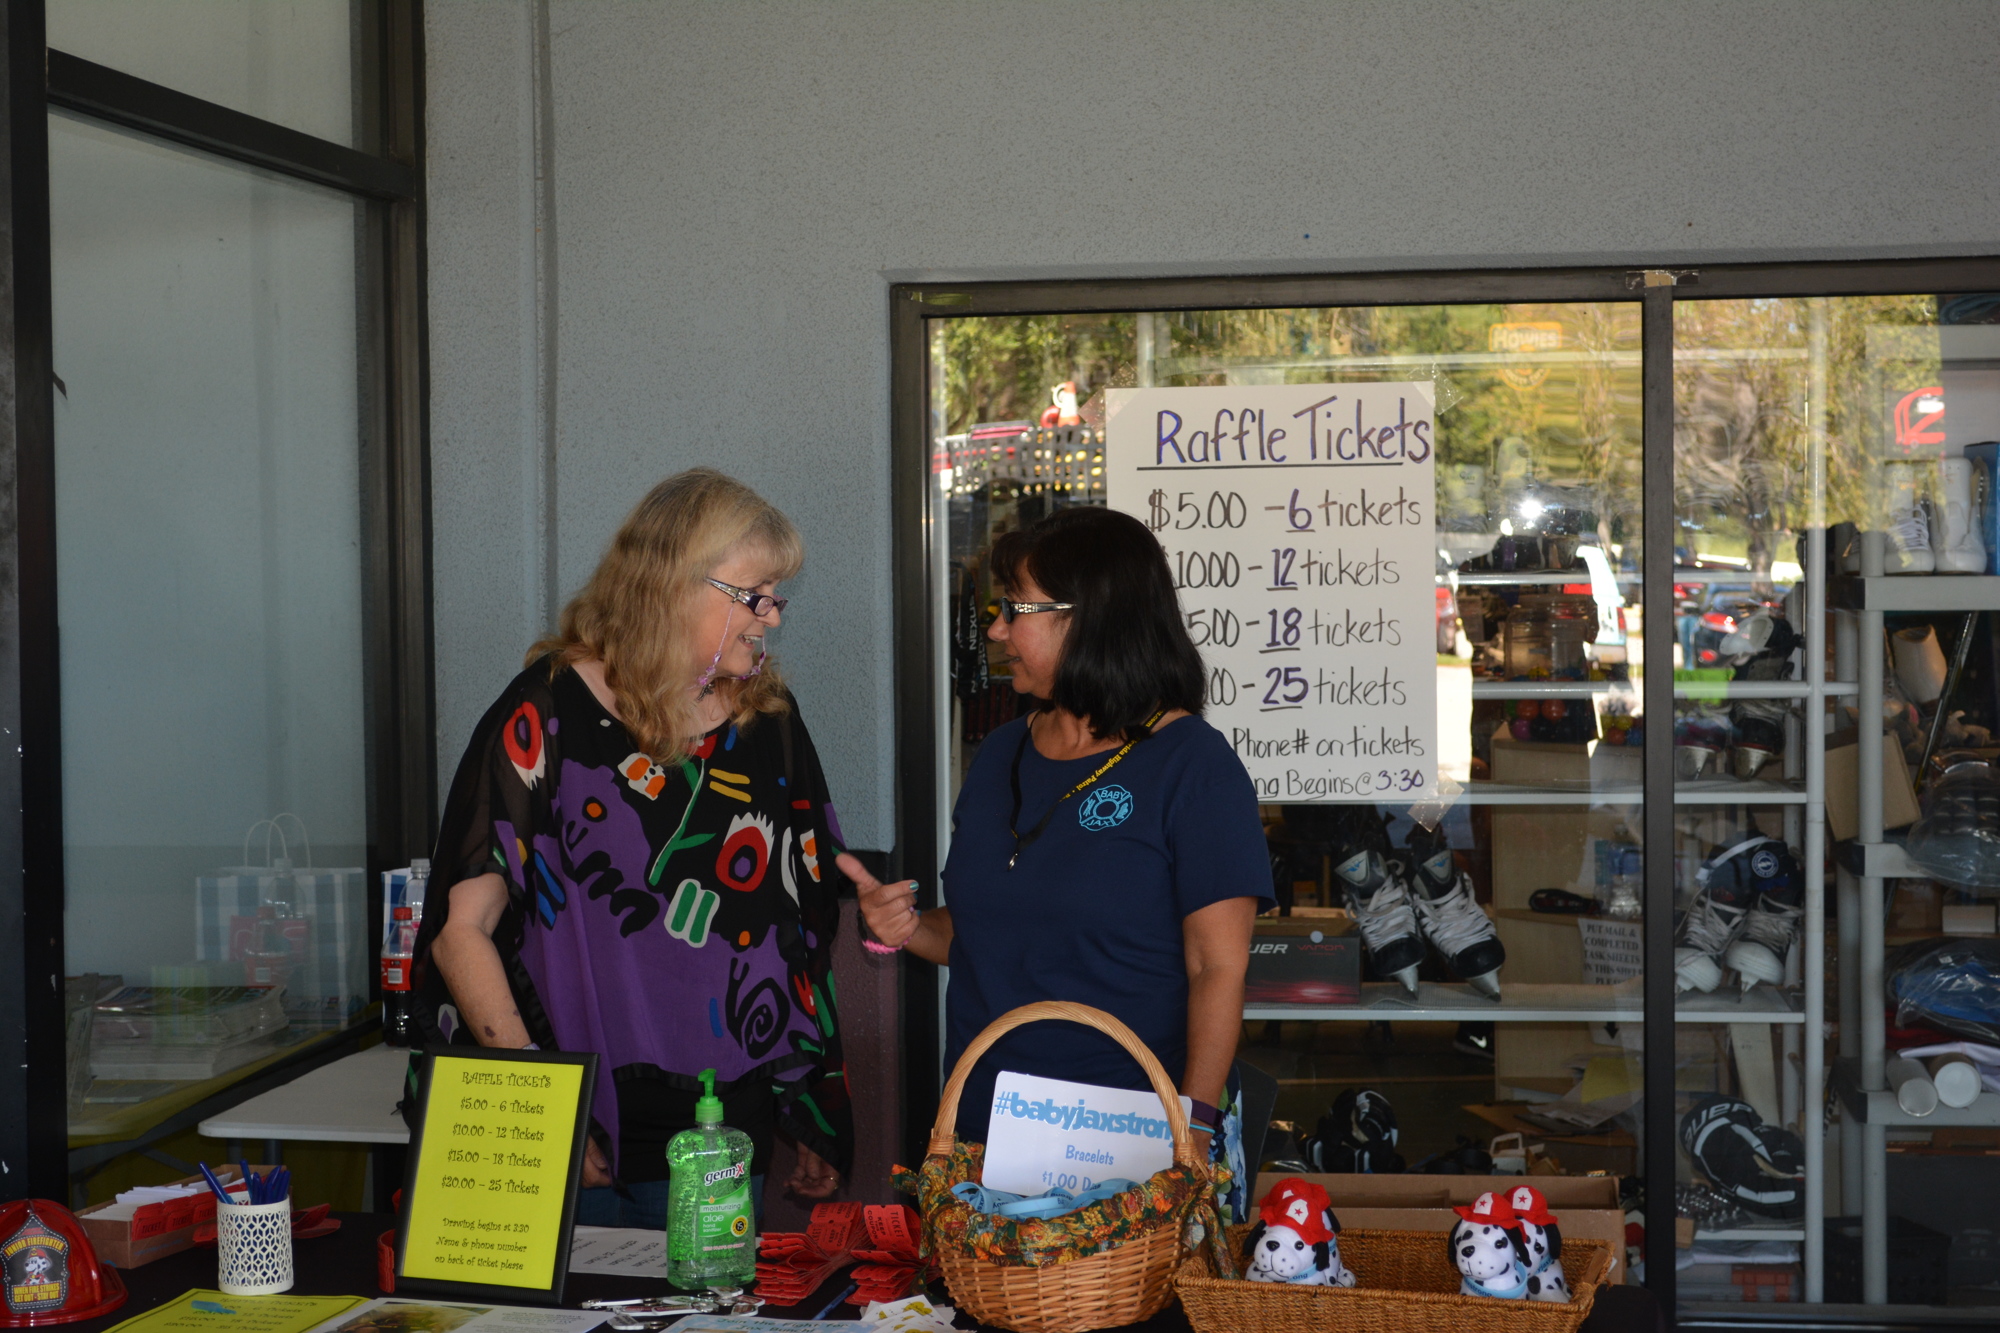 Linda Key, left, and Mary Egan sell raffle tickets to raise money for Baby Jax on Saturday at the Ellenton Ice and Sports Complex.